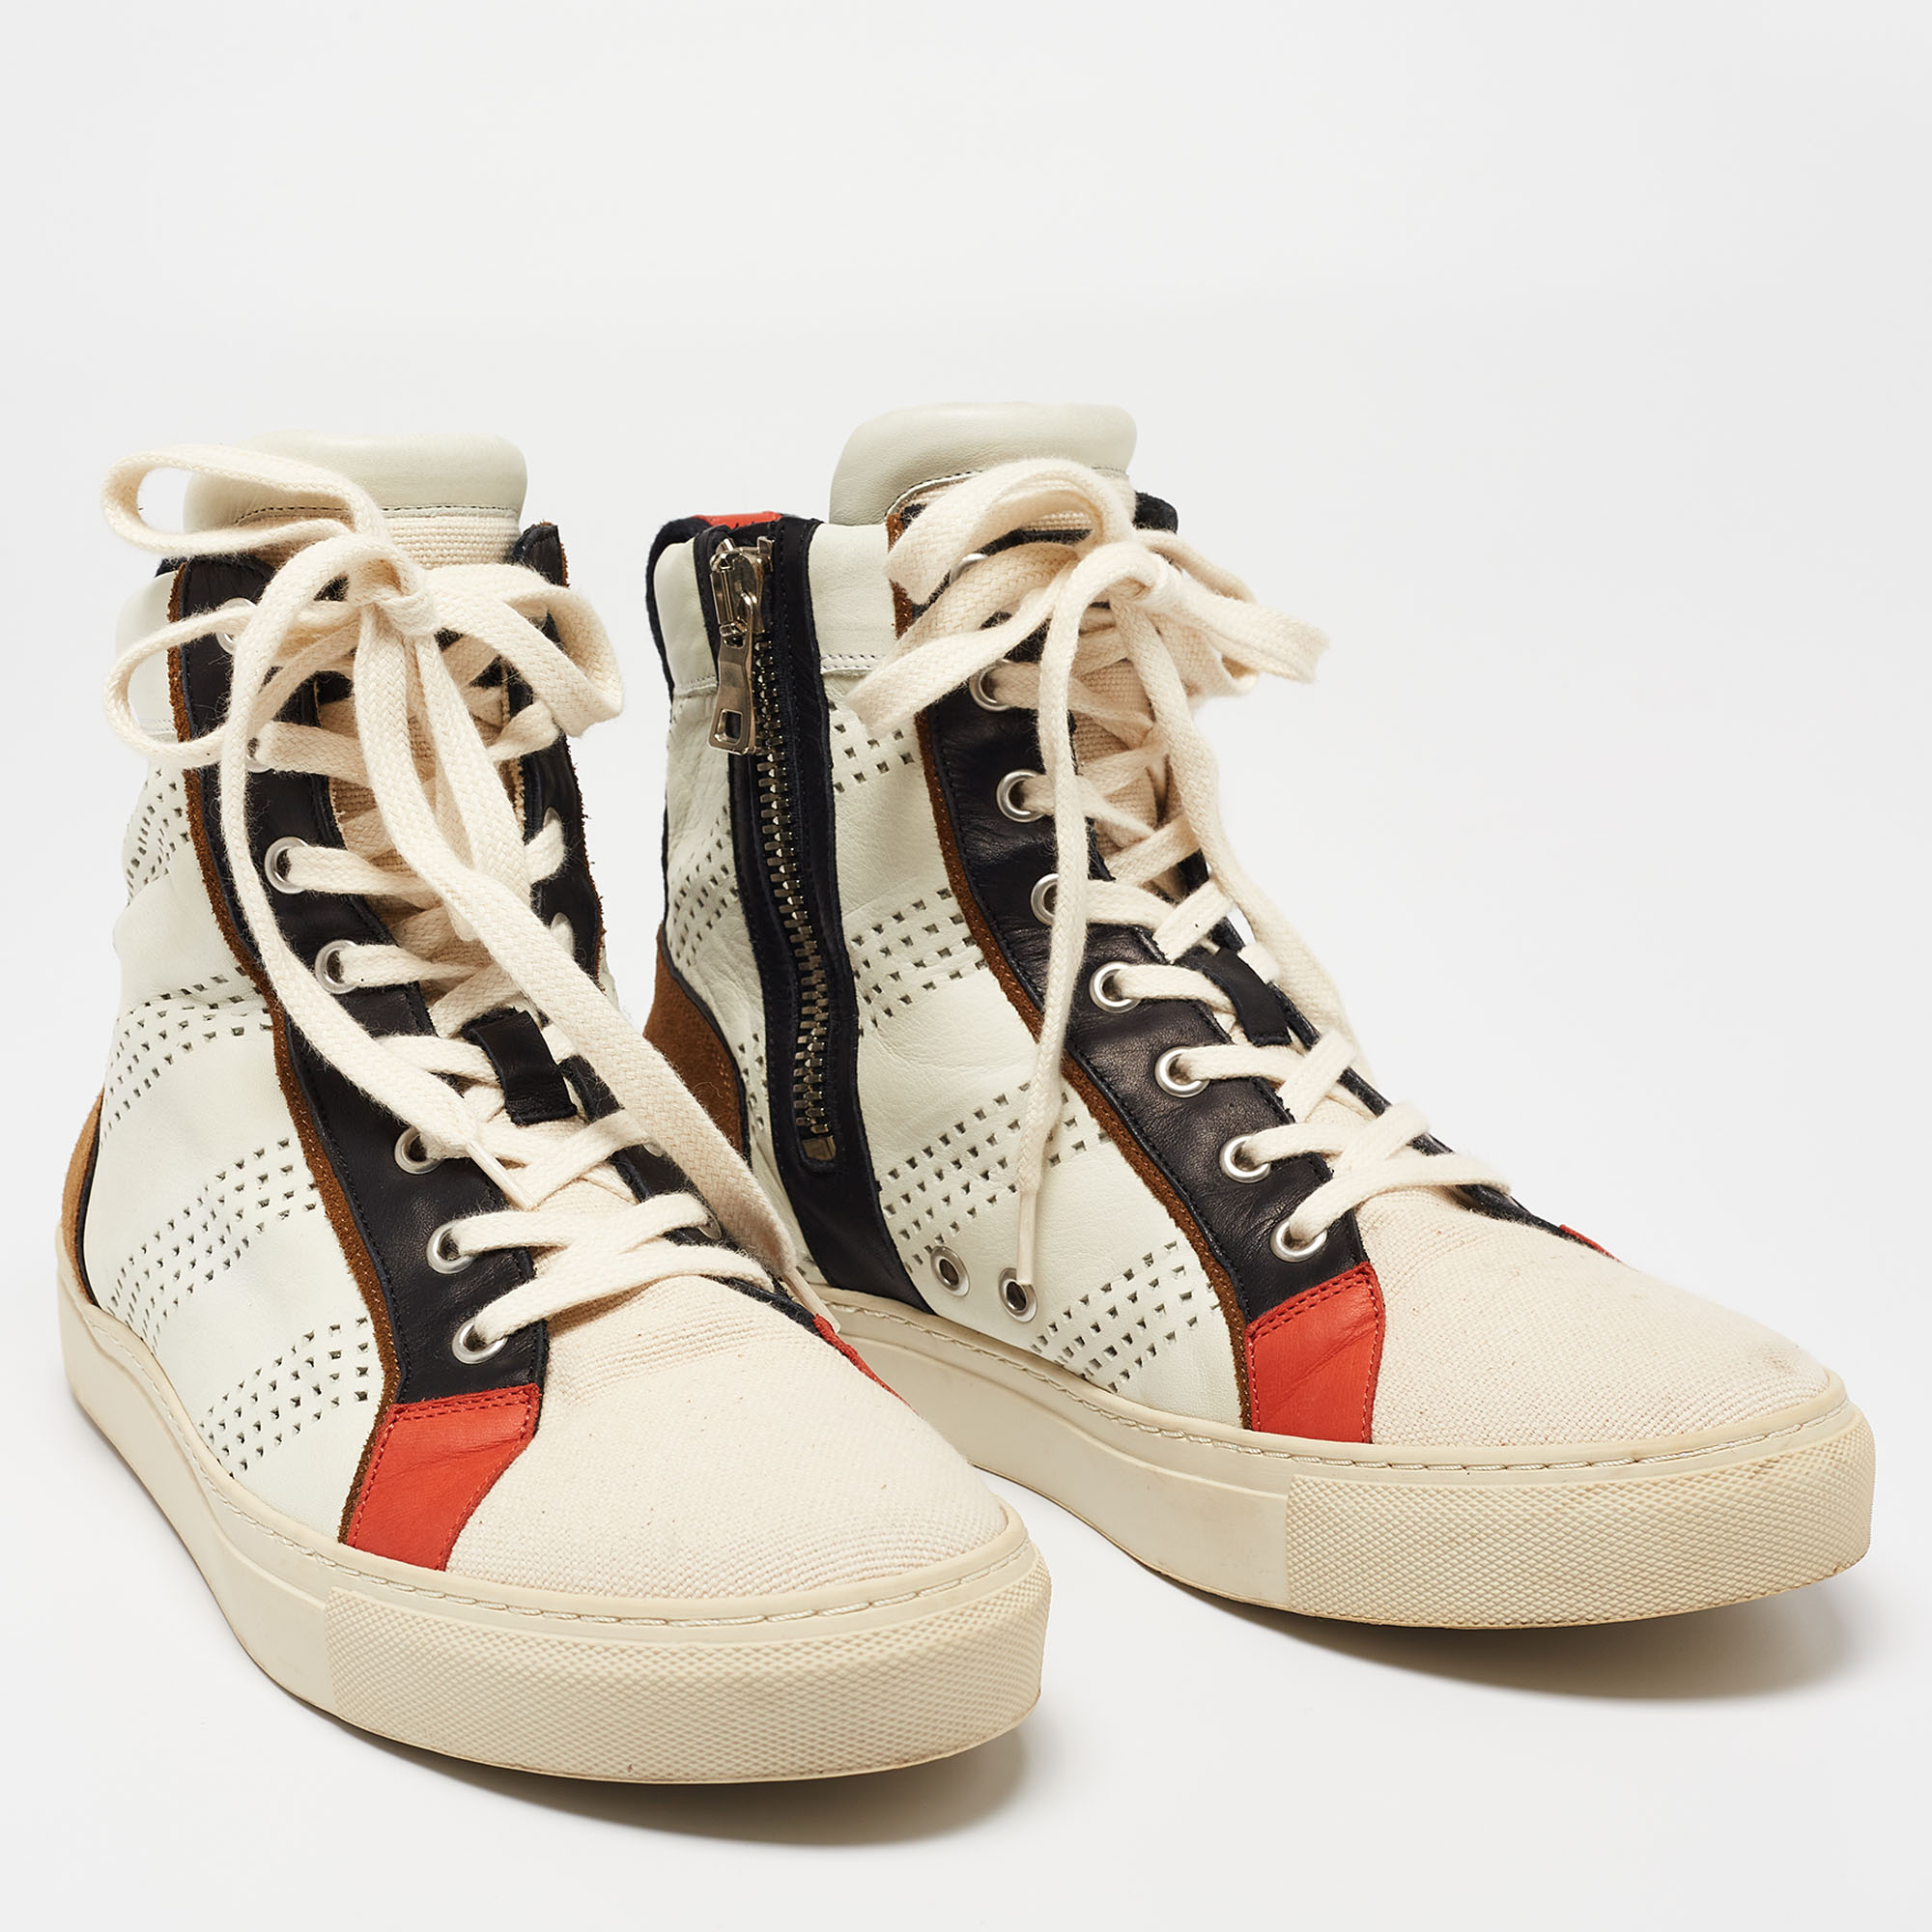 Balmain Multicolor Perforated Leather, Suede And Canvas High-Top Sneakers Size 42